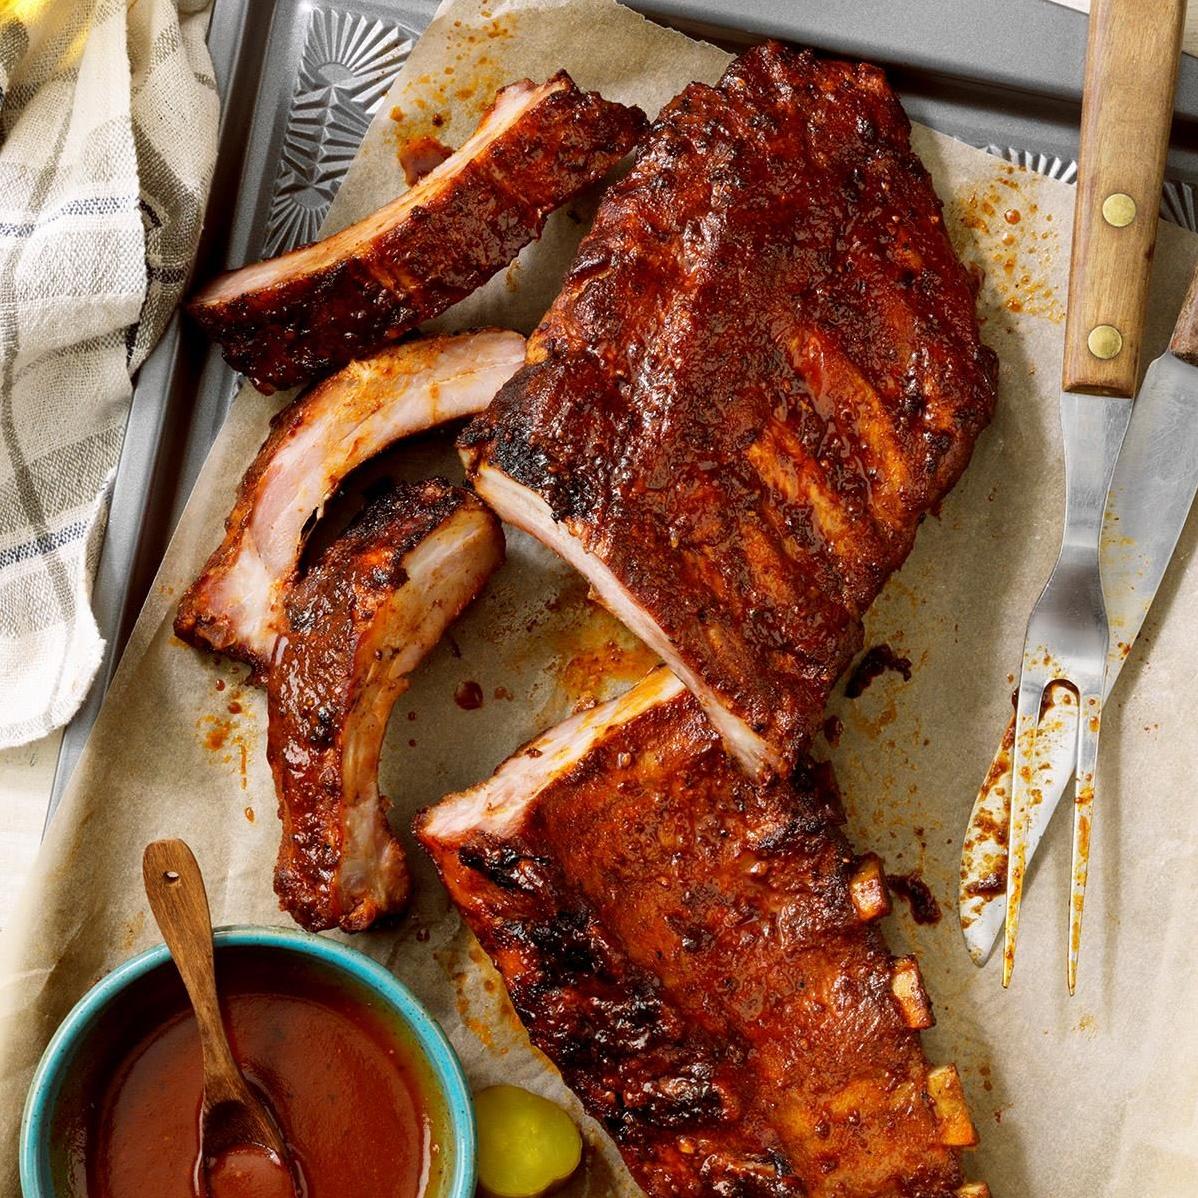  Don't be shy with the dry rub seasoning! It's what gives these ribs that signature southern flavor.